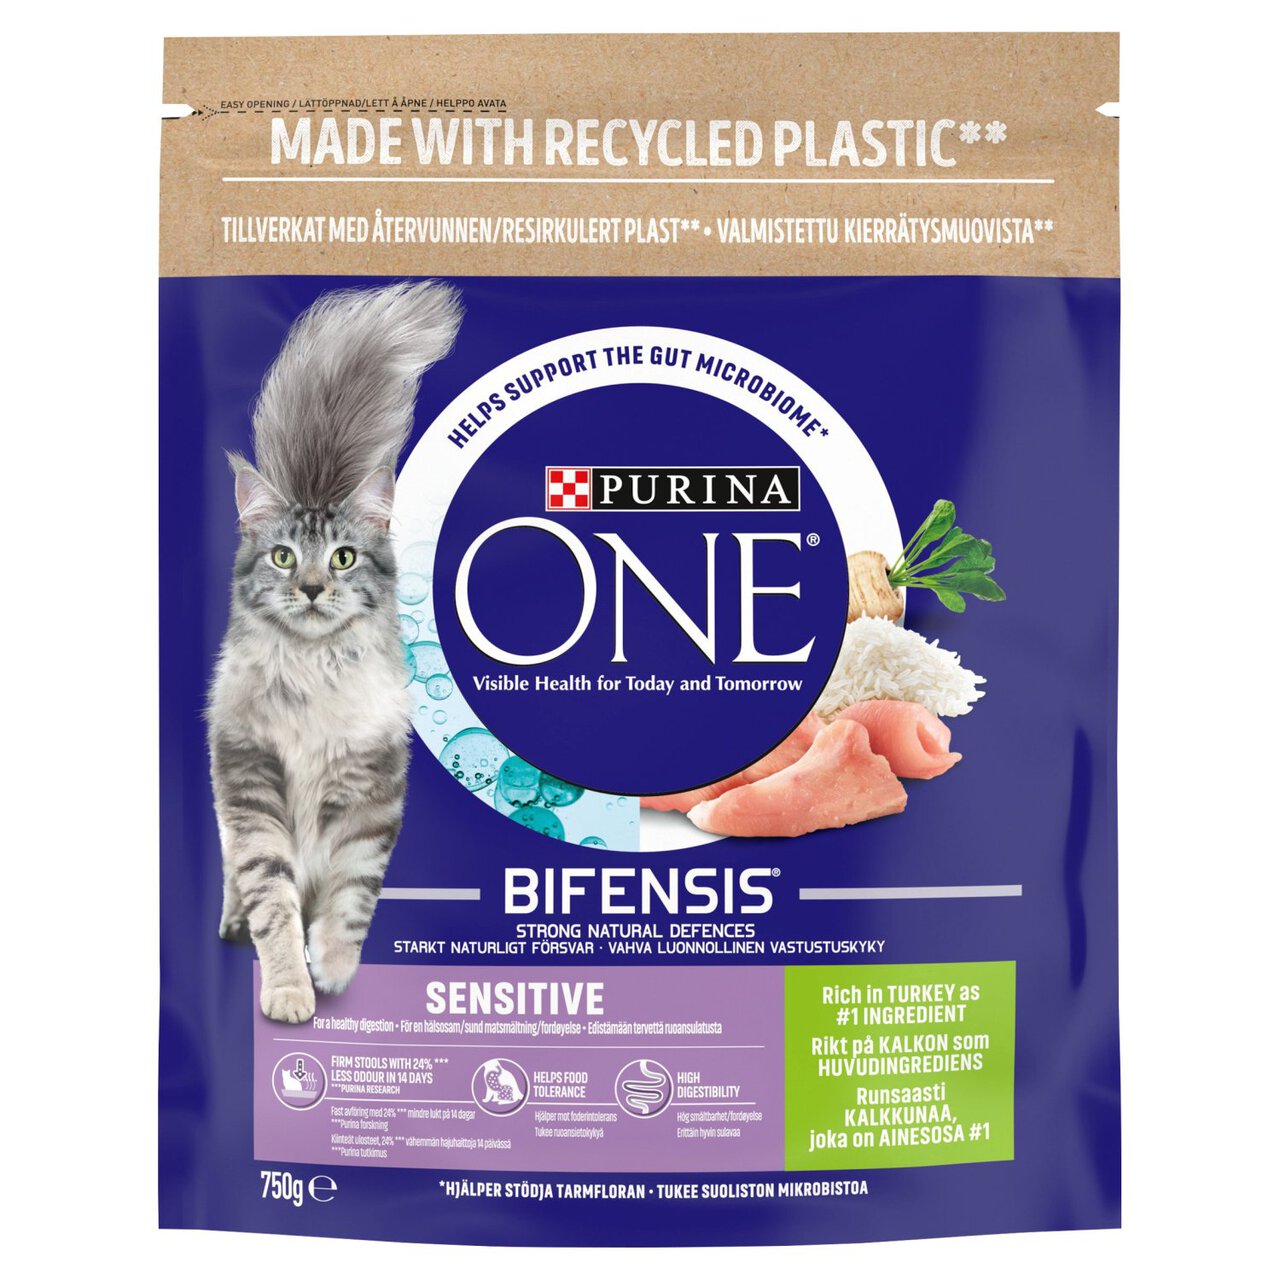 Purina ONE Sensitive Dry Cat Food Turkey and Rice 750g